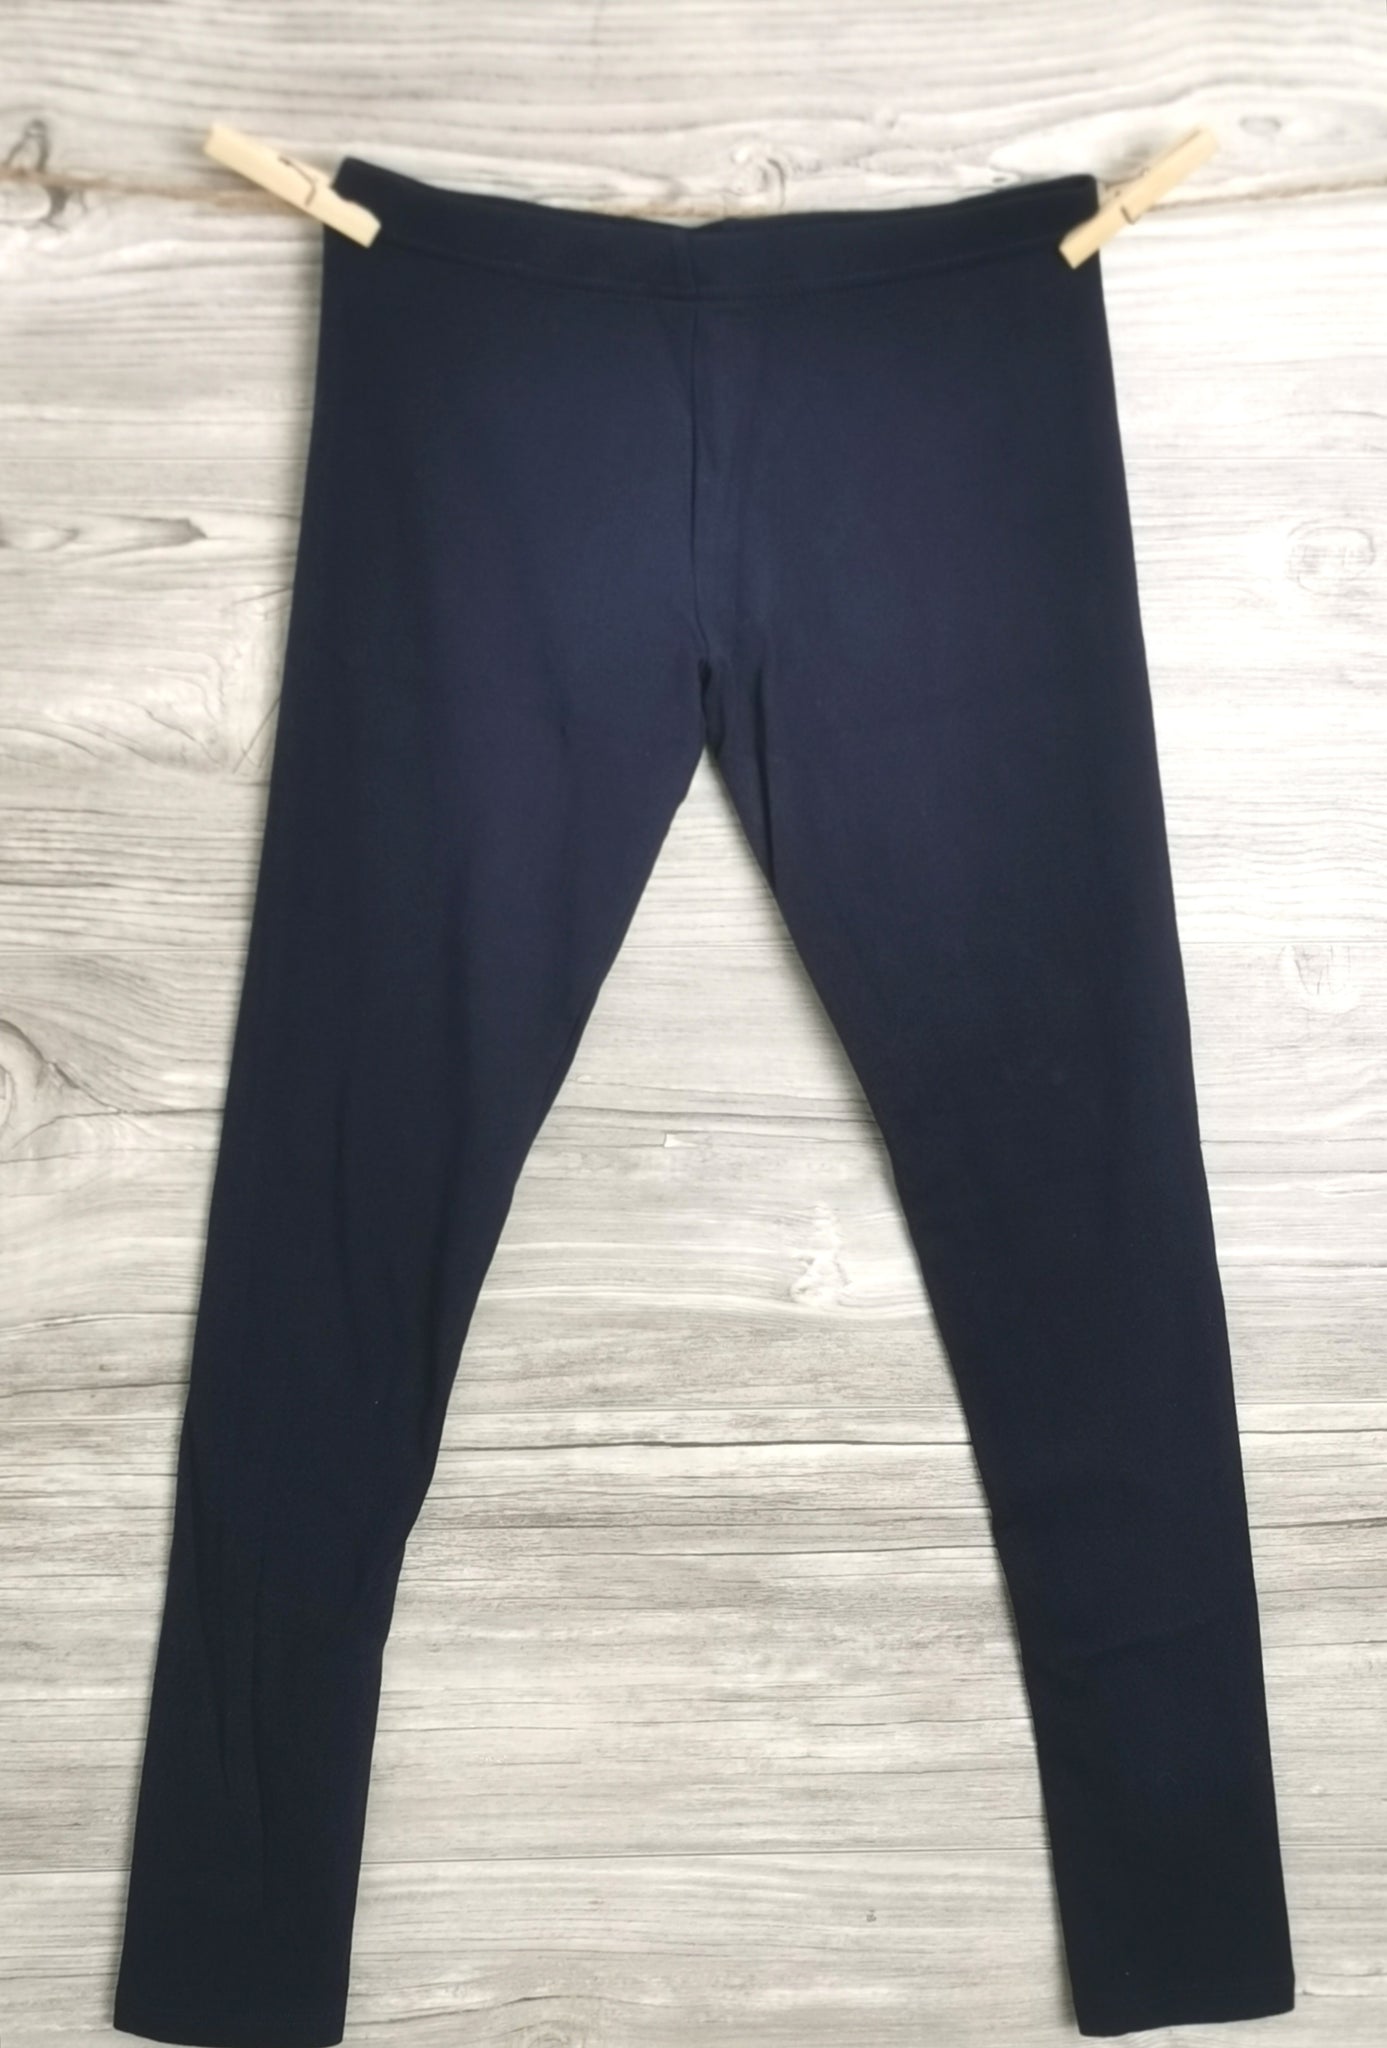 GIRL SIZE LARGE (10/12 YEARS) - GEORGE, Navy Blue Leggings EUC B8 – Faith  and Love Thrift